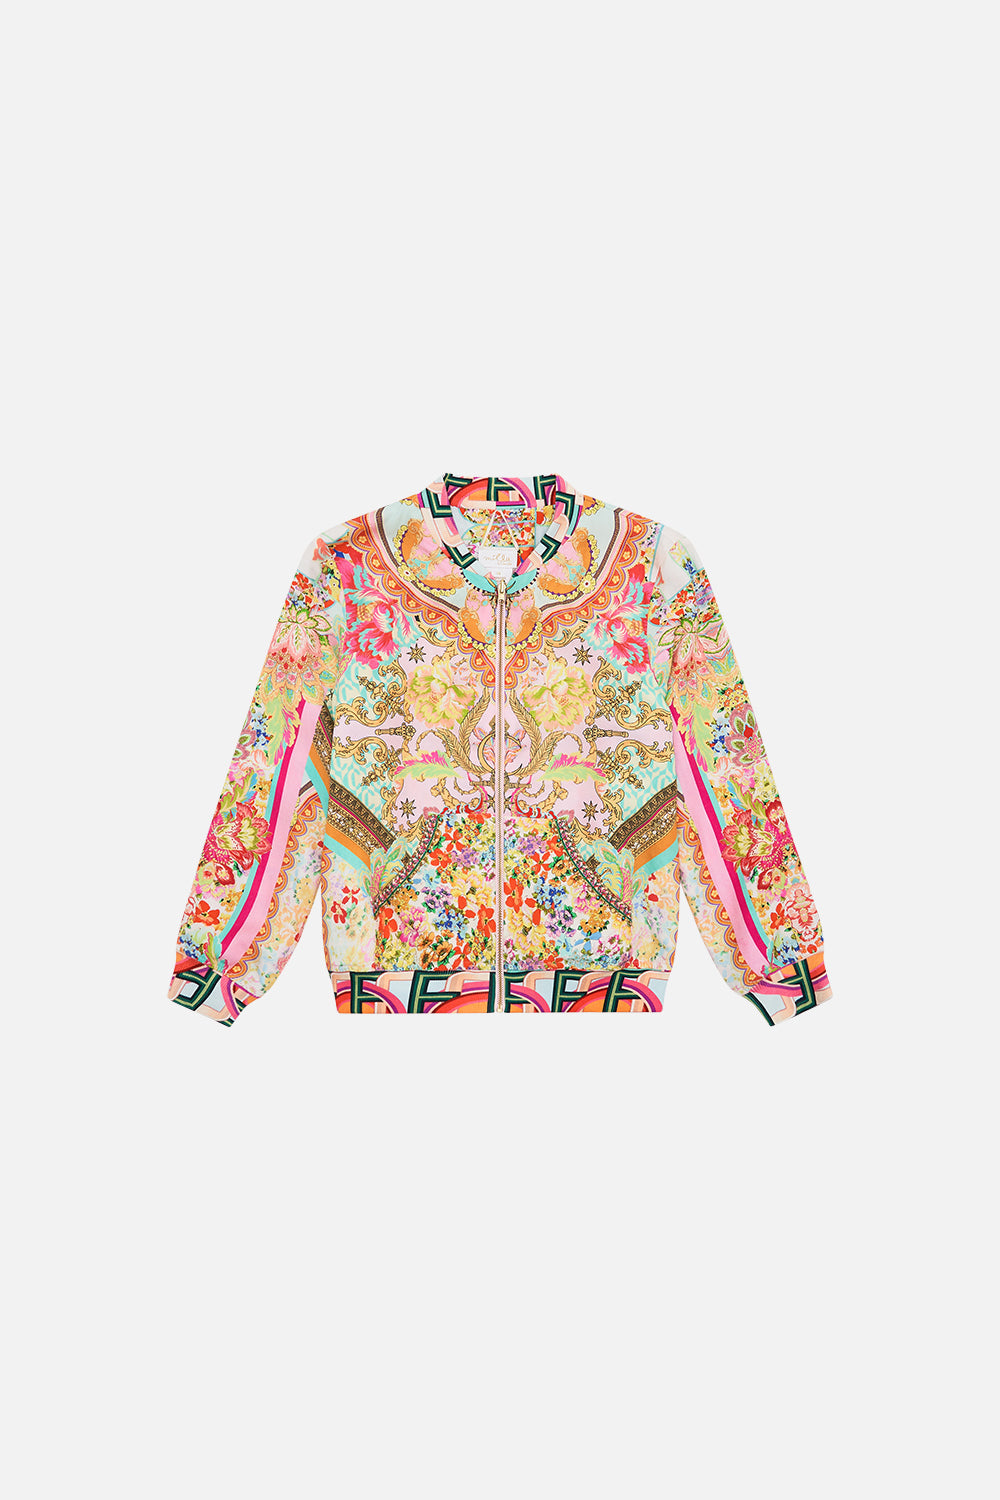 Product view of MILLA BY CAMILLA kids bomber jacket in An Italian Welcome print